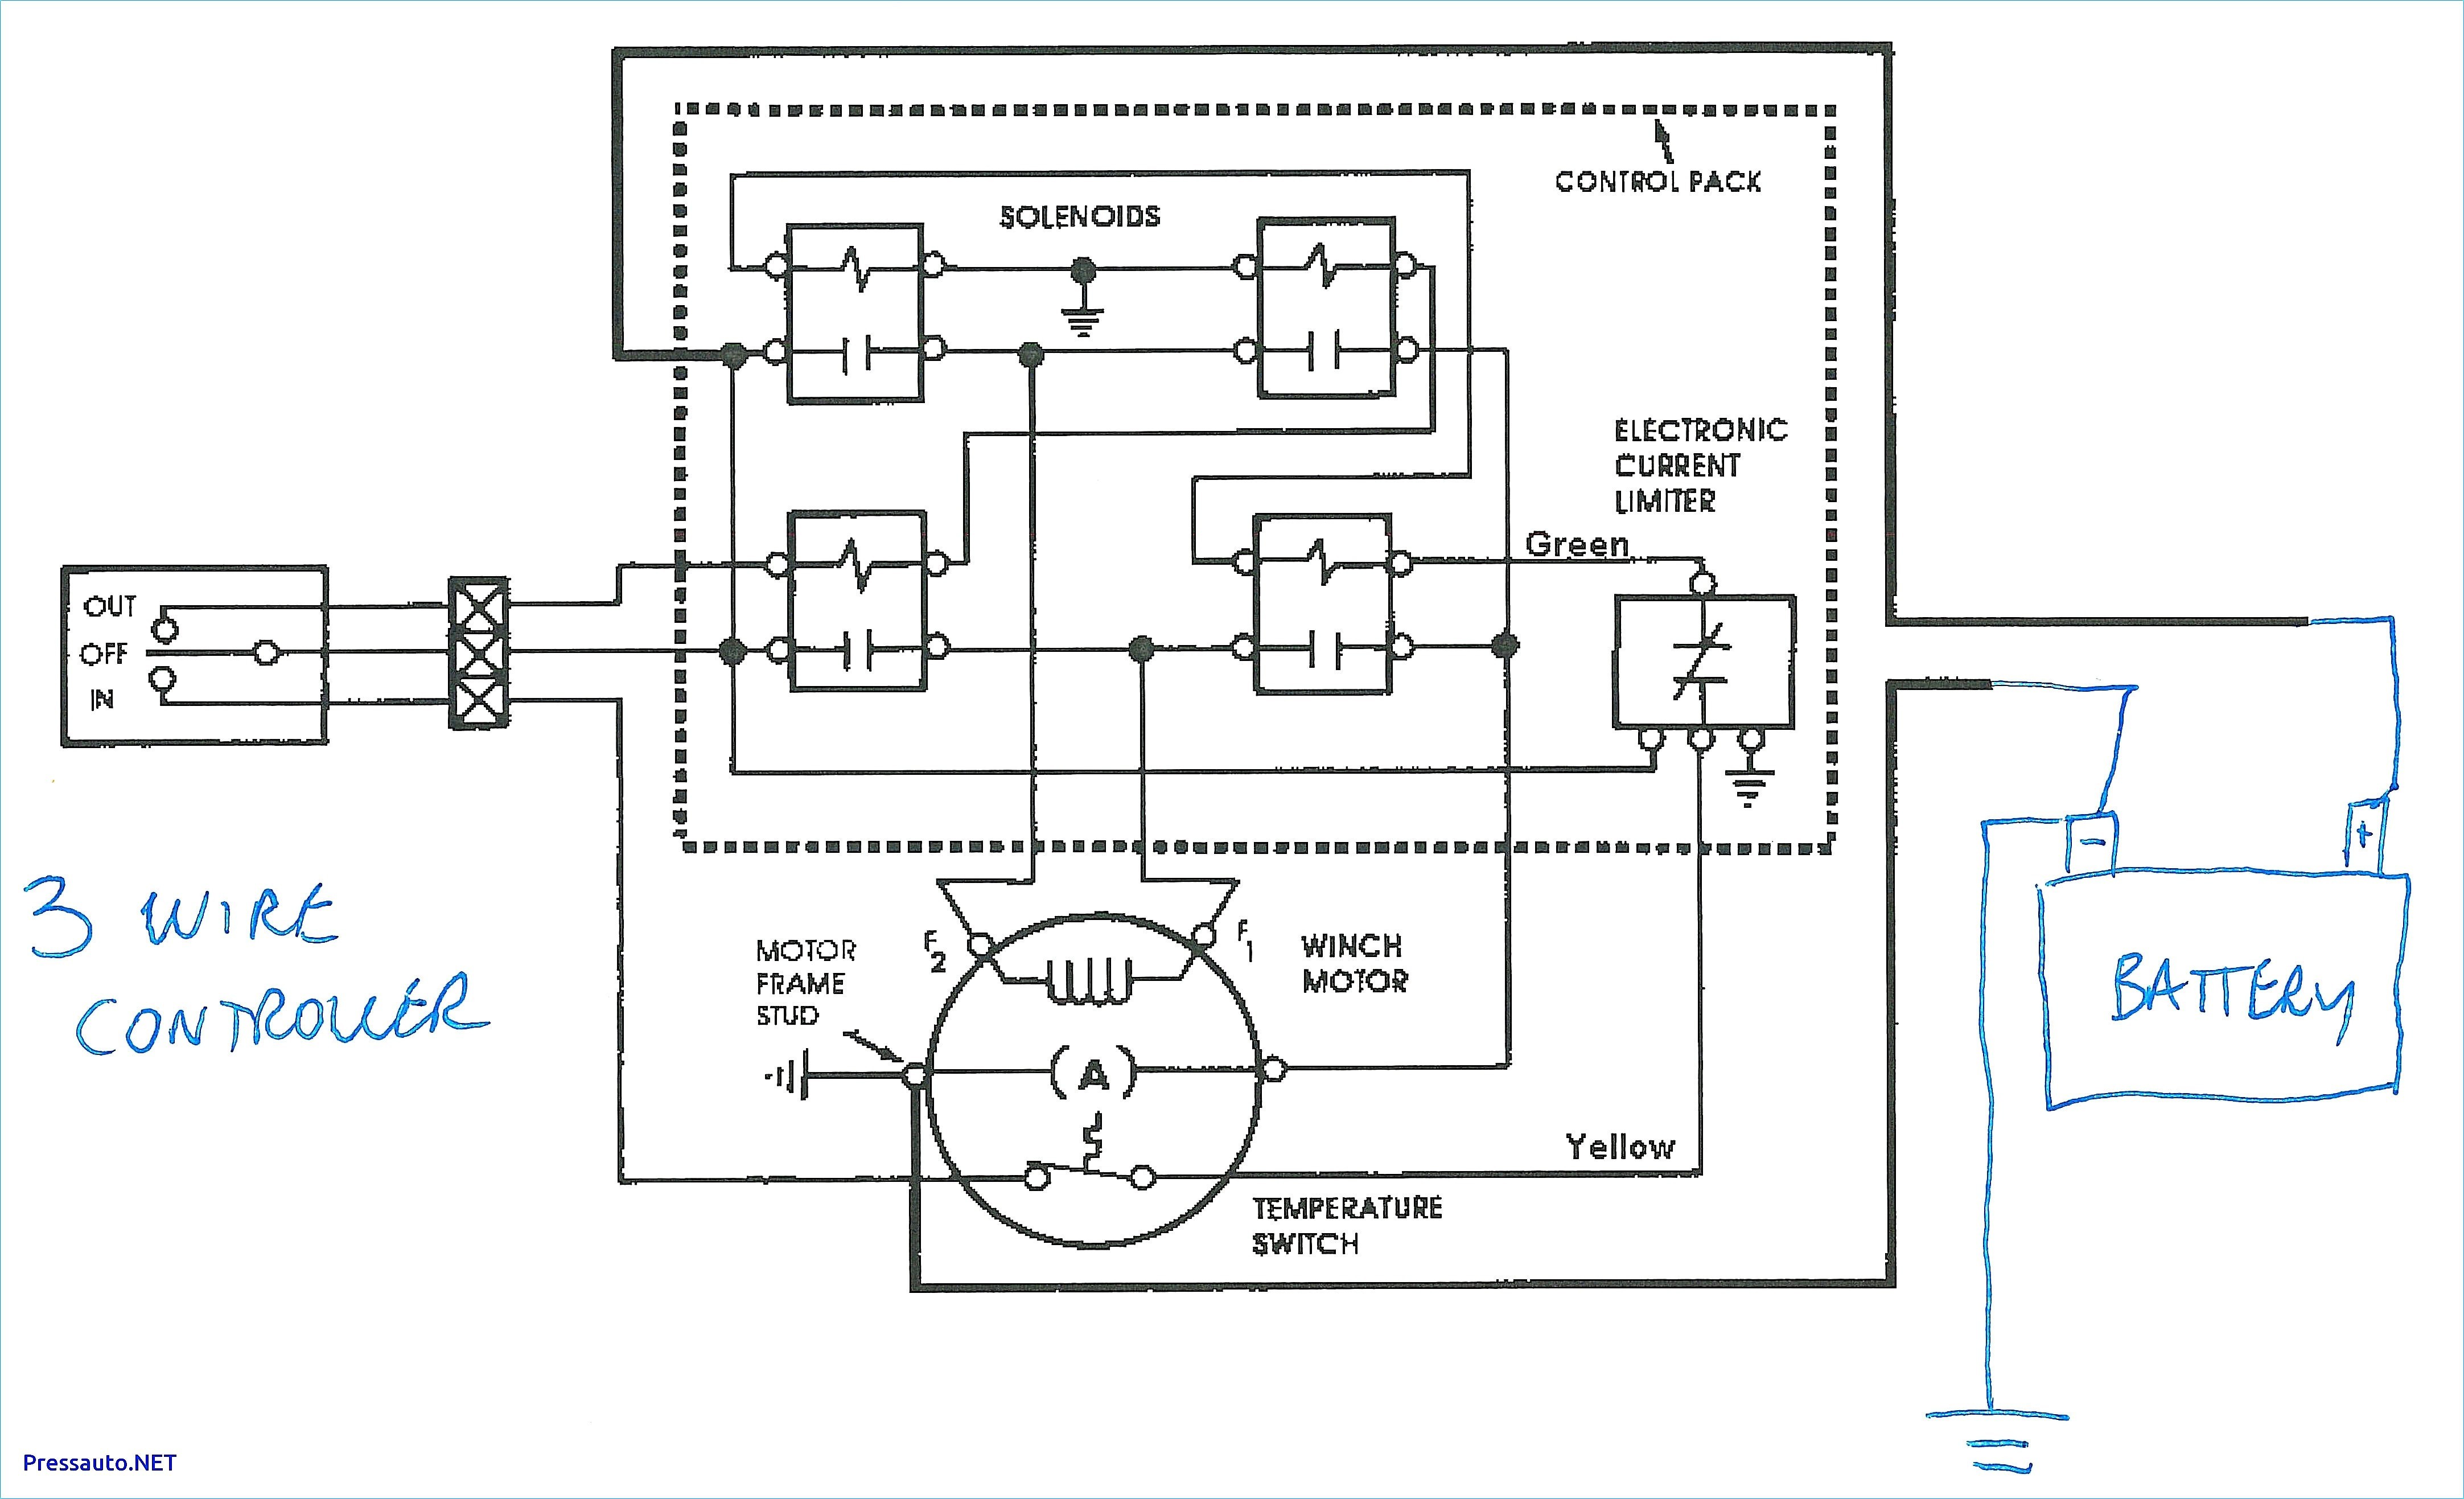 Wiring Diagram for Winch solenoid Inspirationa Wiring Diagram Winch solenoid Refrence Badland Winch Wiring Diagram